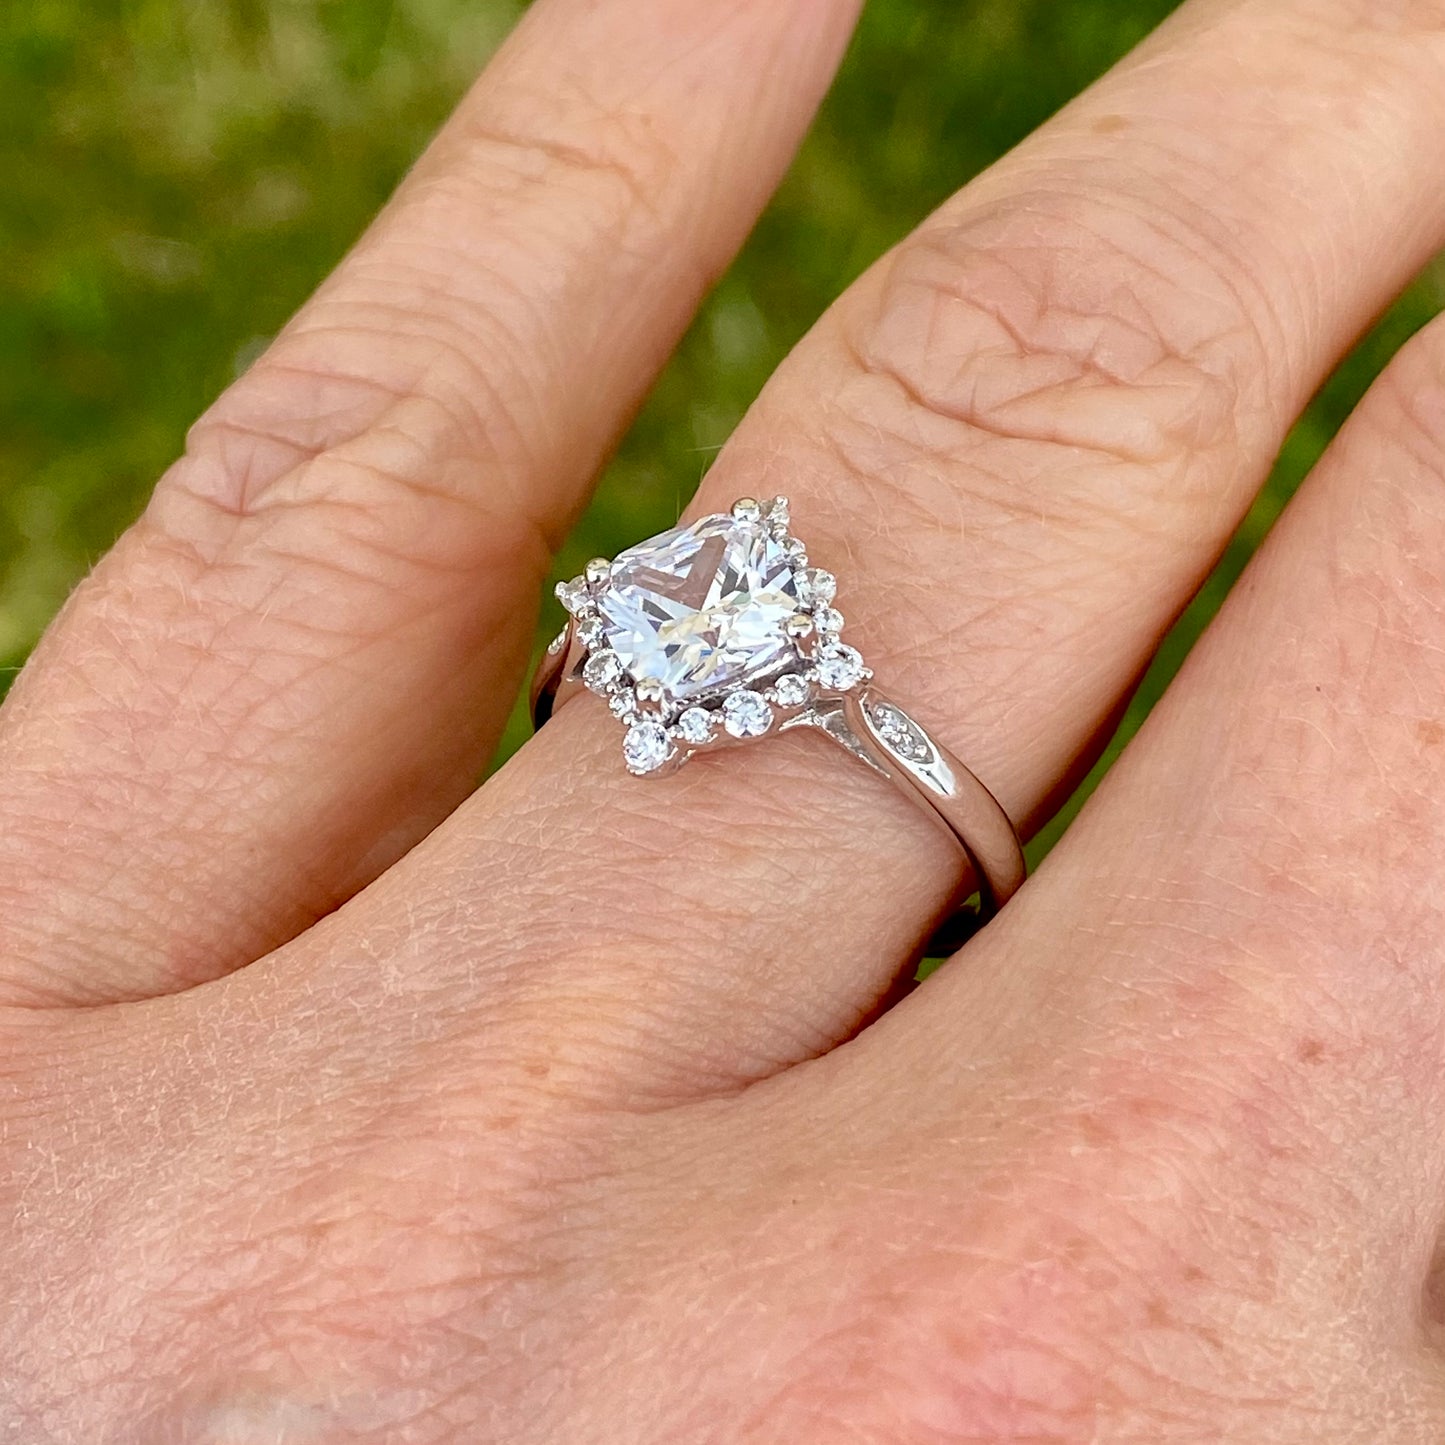 9ct White Gold CZ Halo Ring - John Ross Jewellers